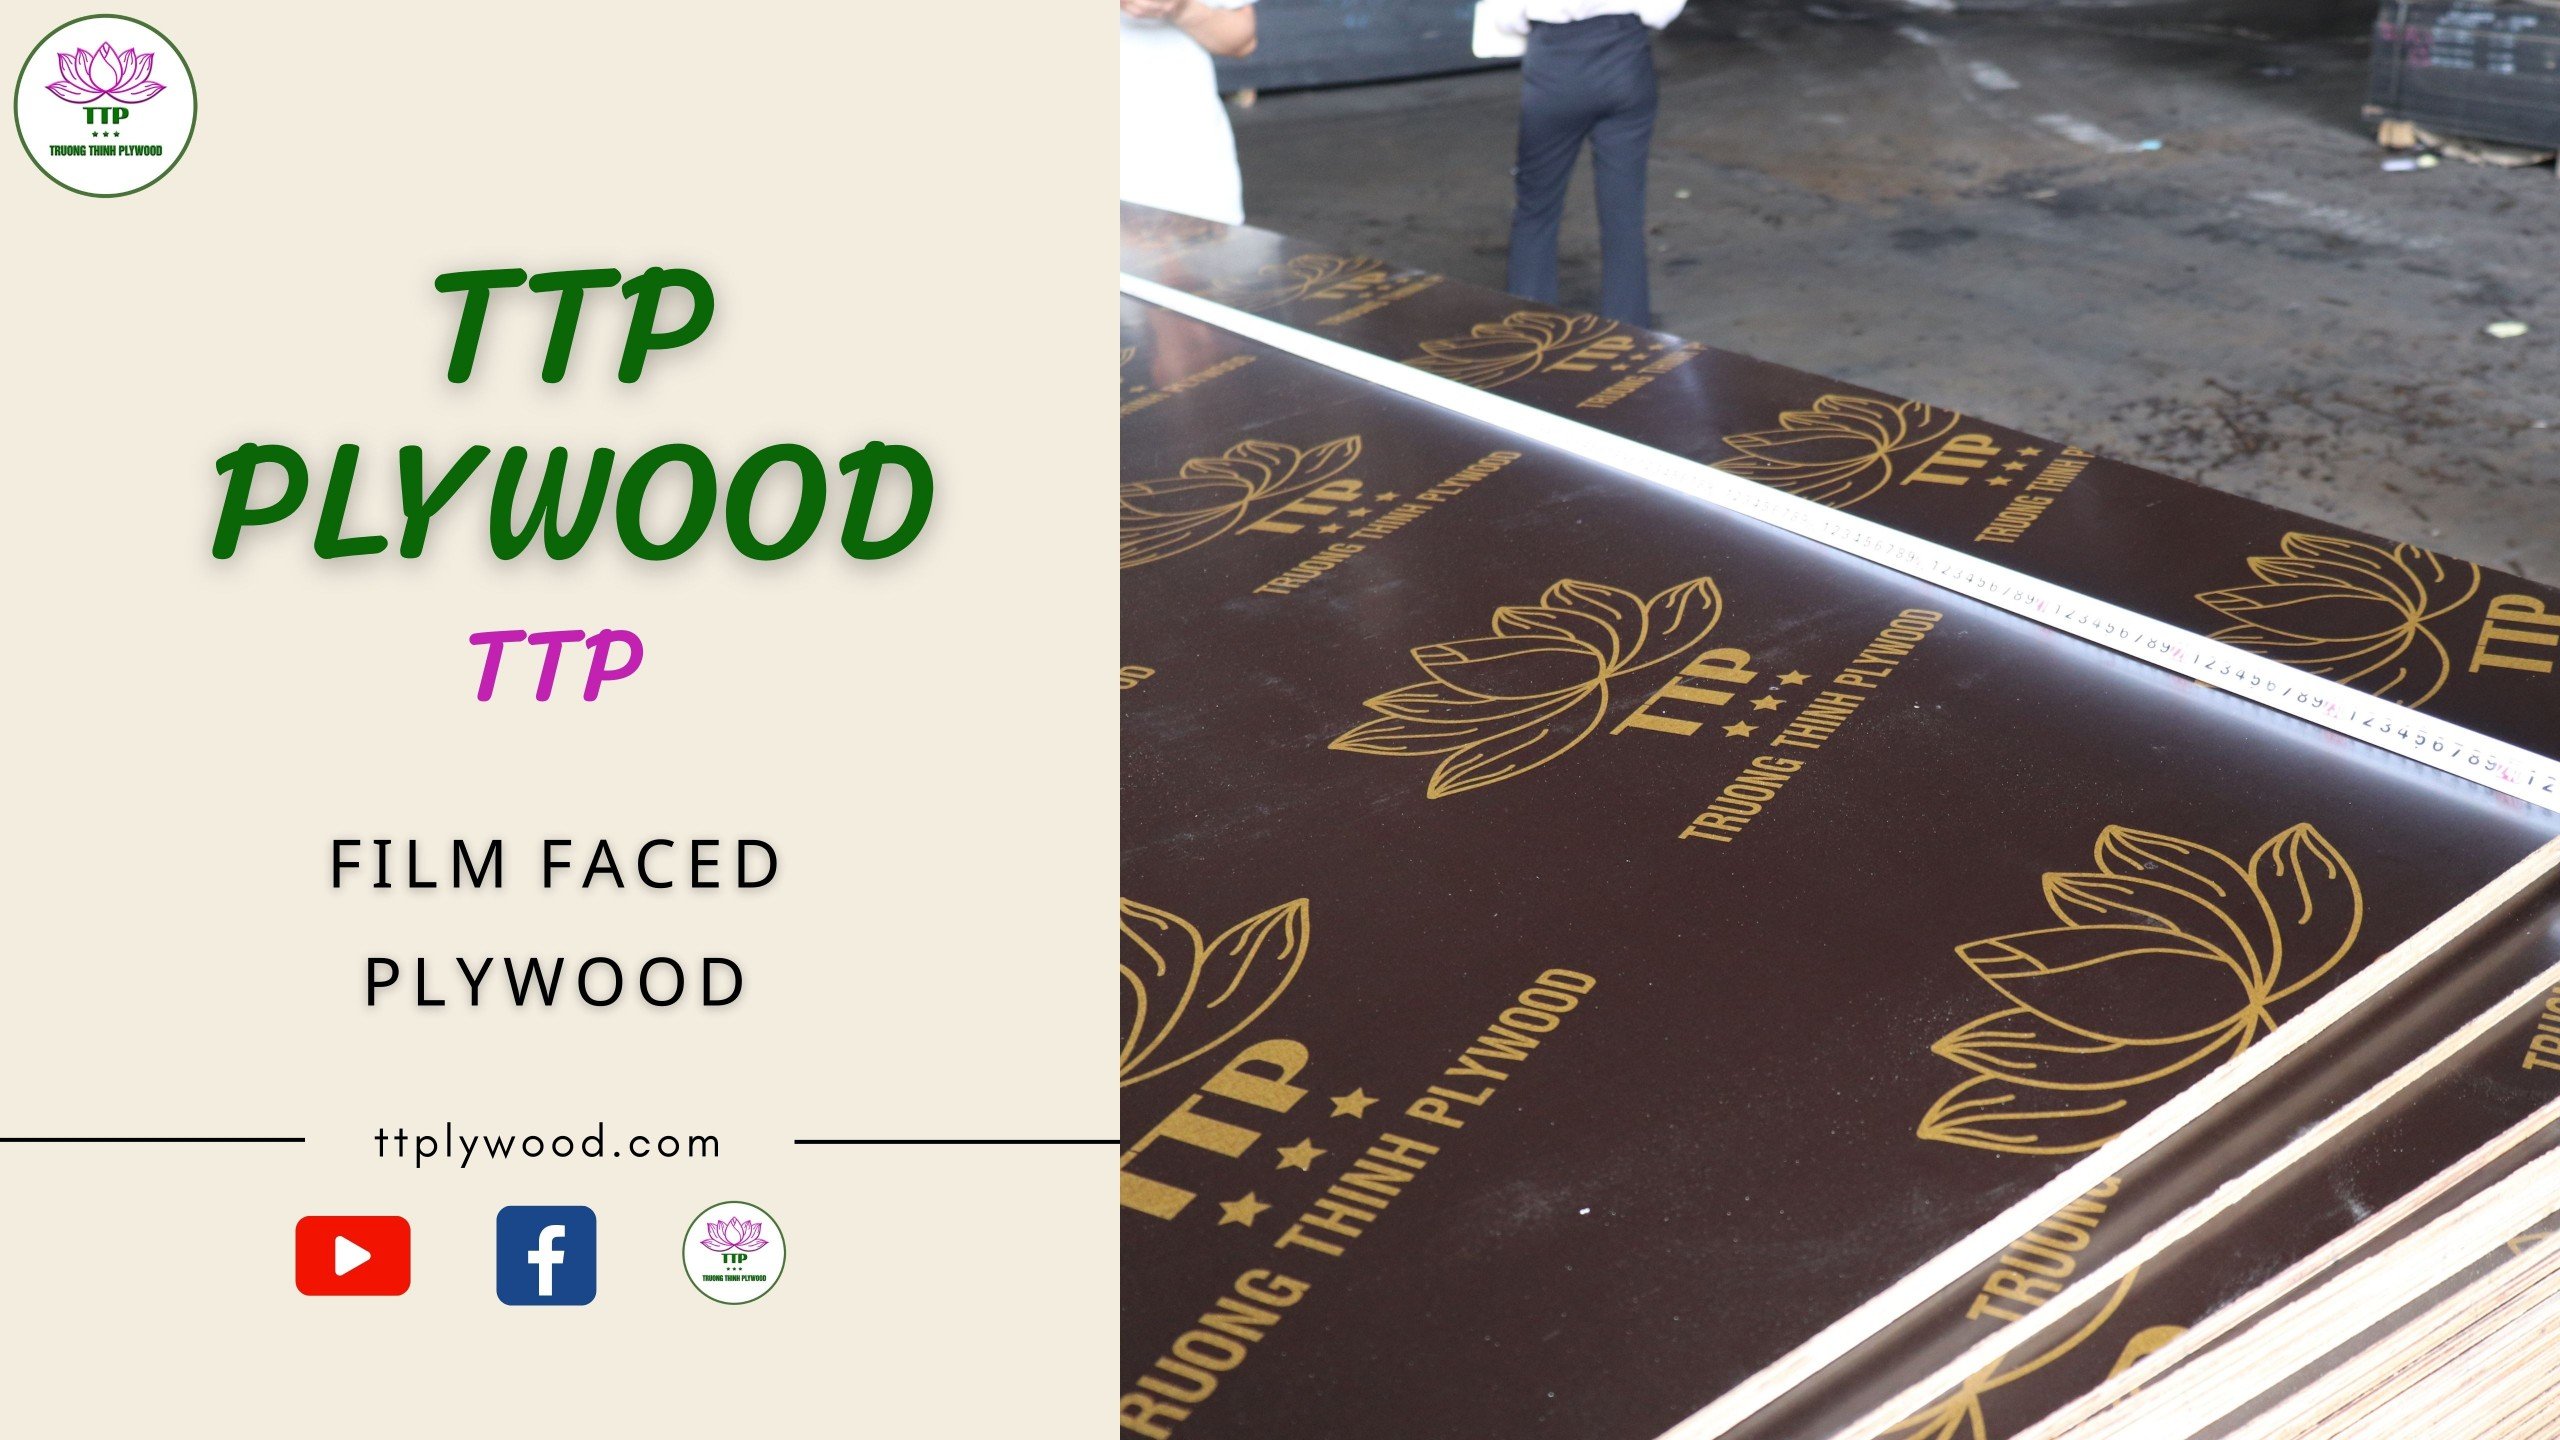 BASIC INFORMATION THAT YOU NEED TO KNOW ABOUT FILM-FACED PLYWOOD